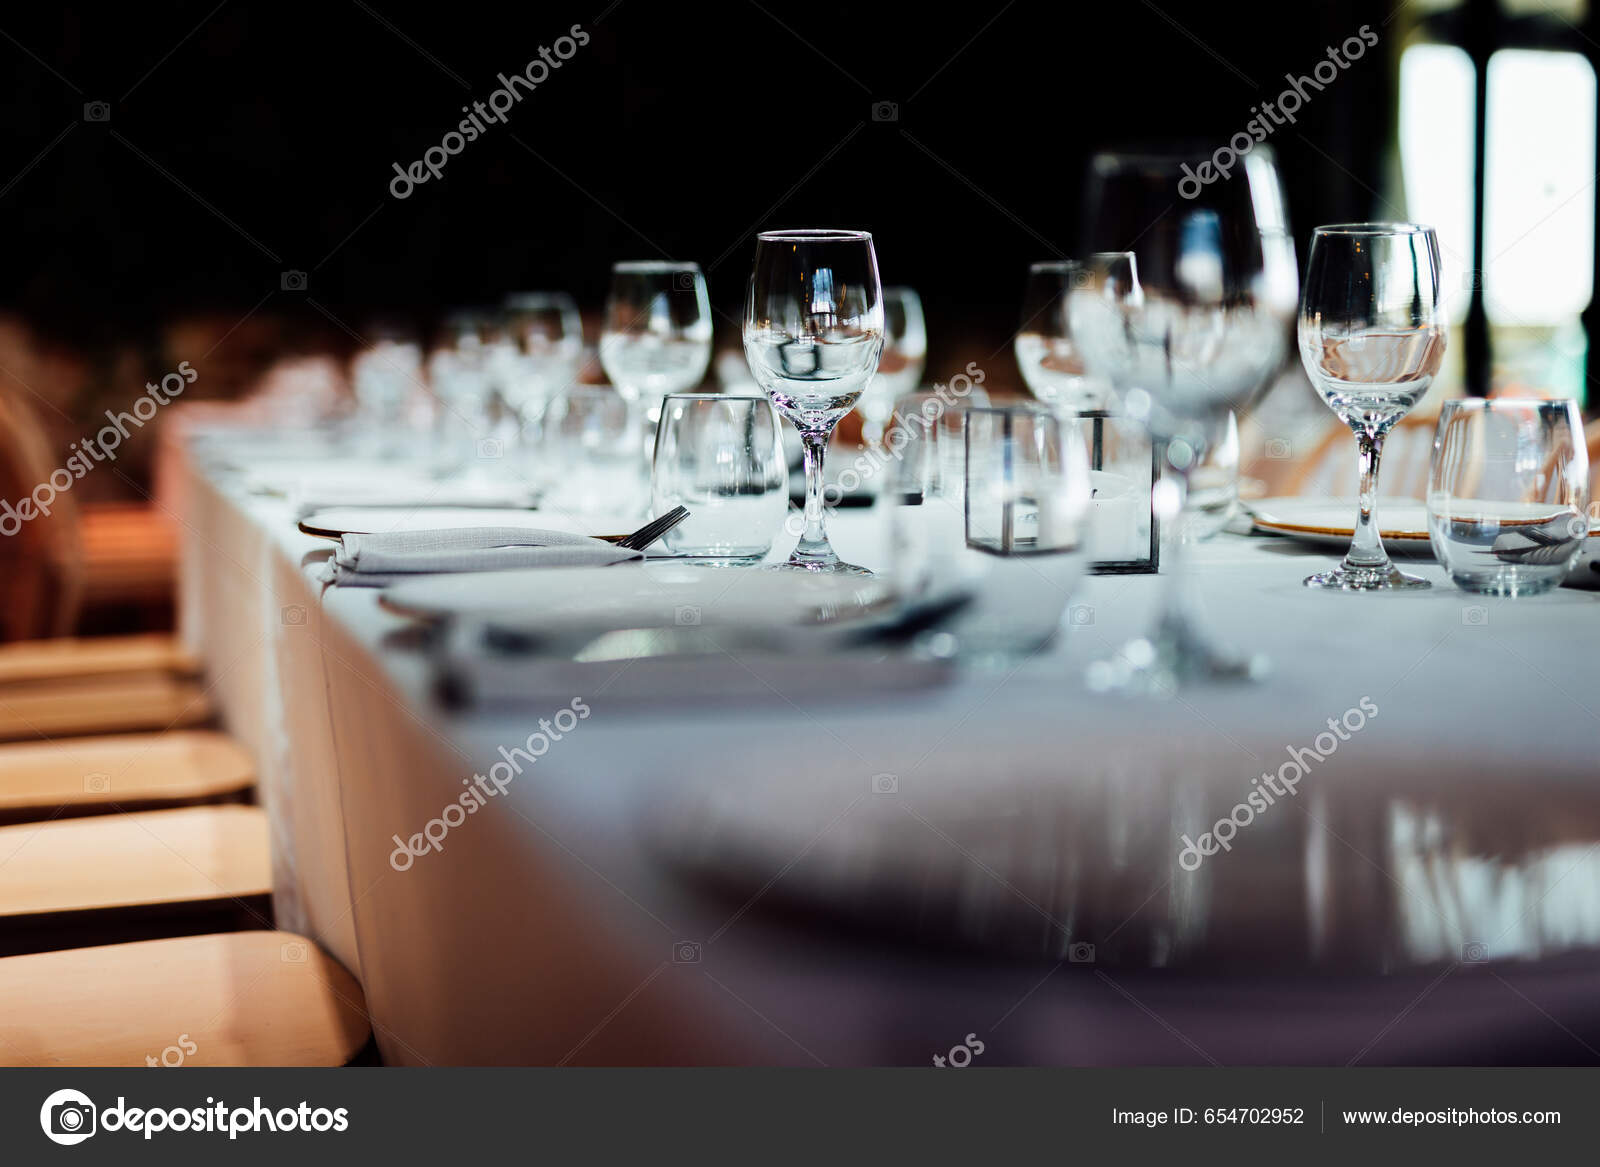 Luxury table settings for fine dining with and glassware, pouring